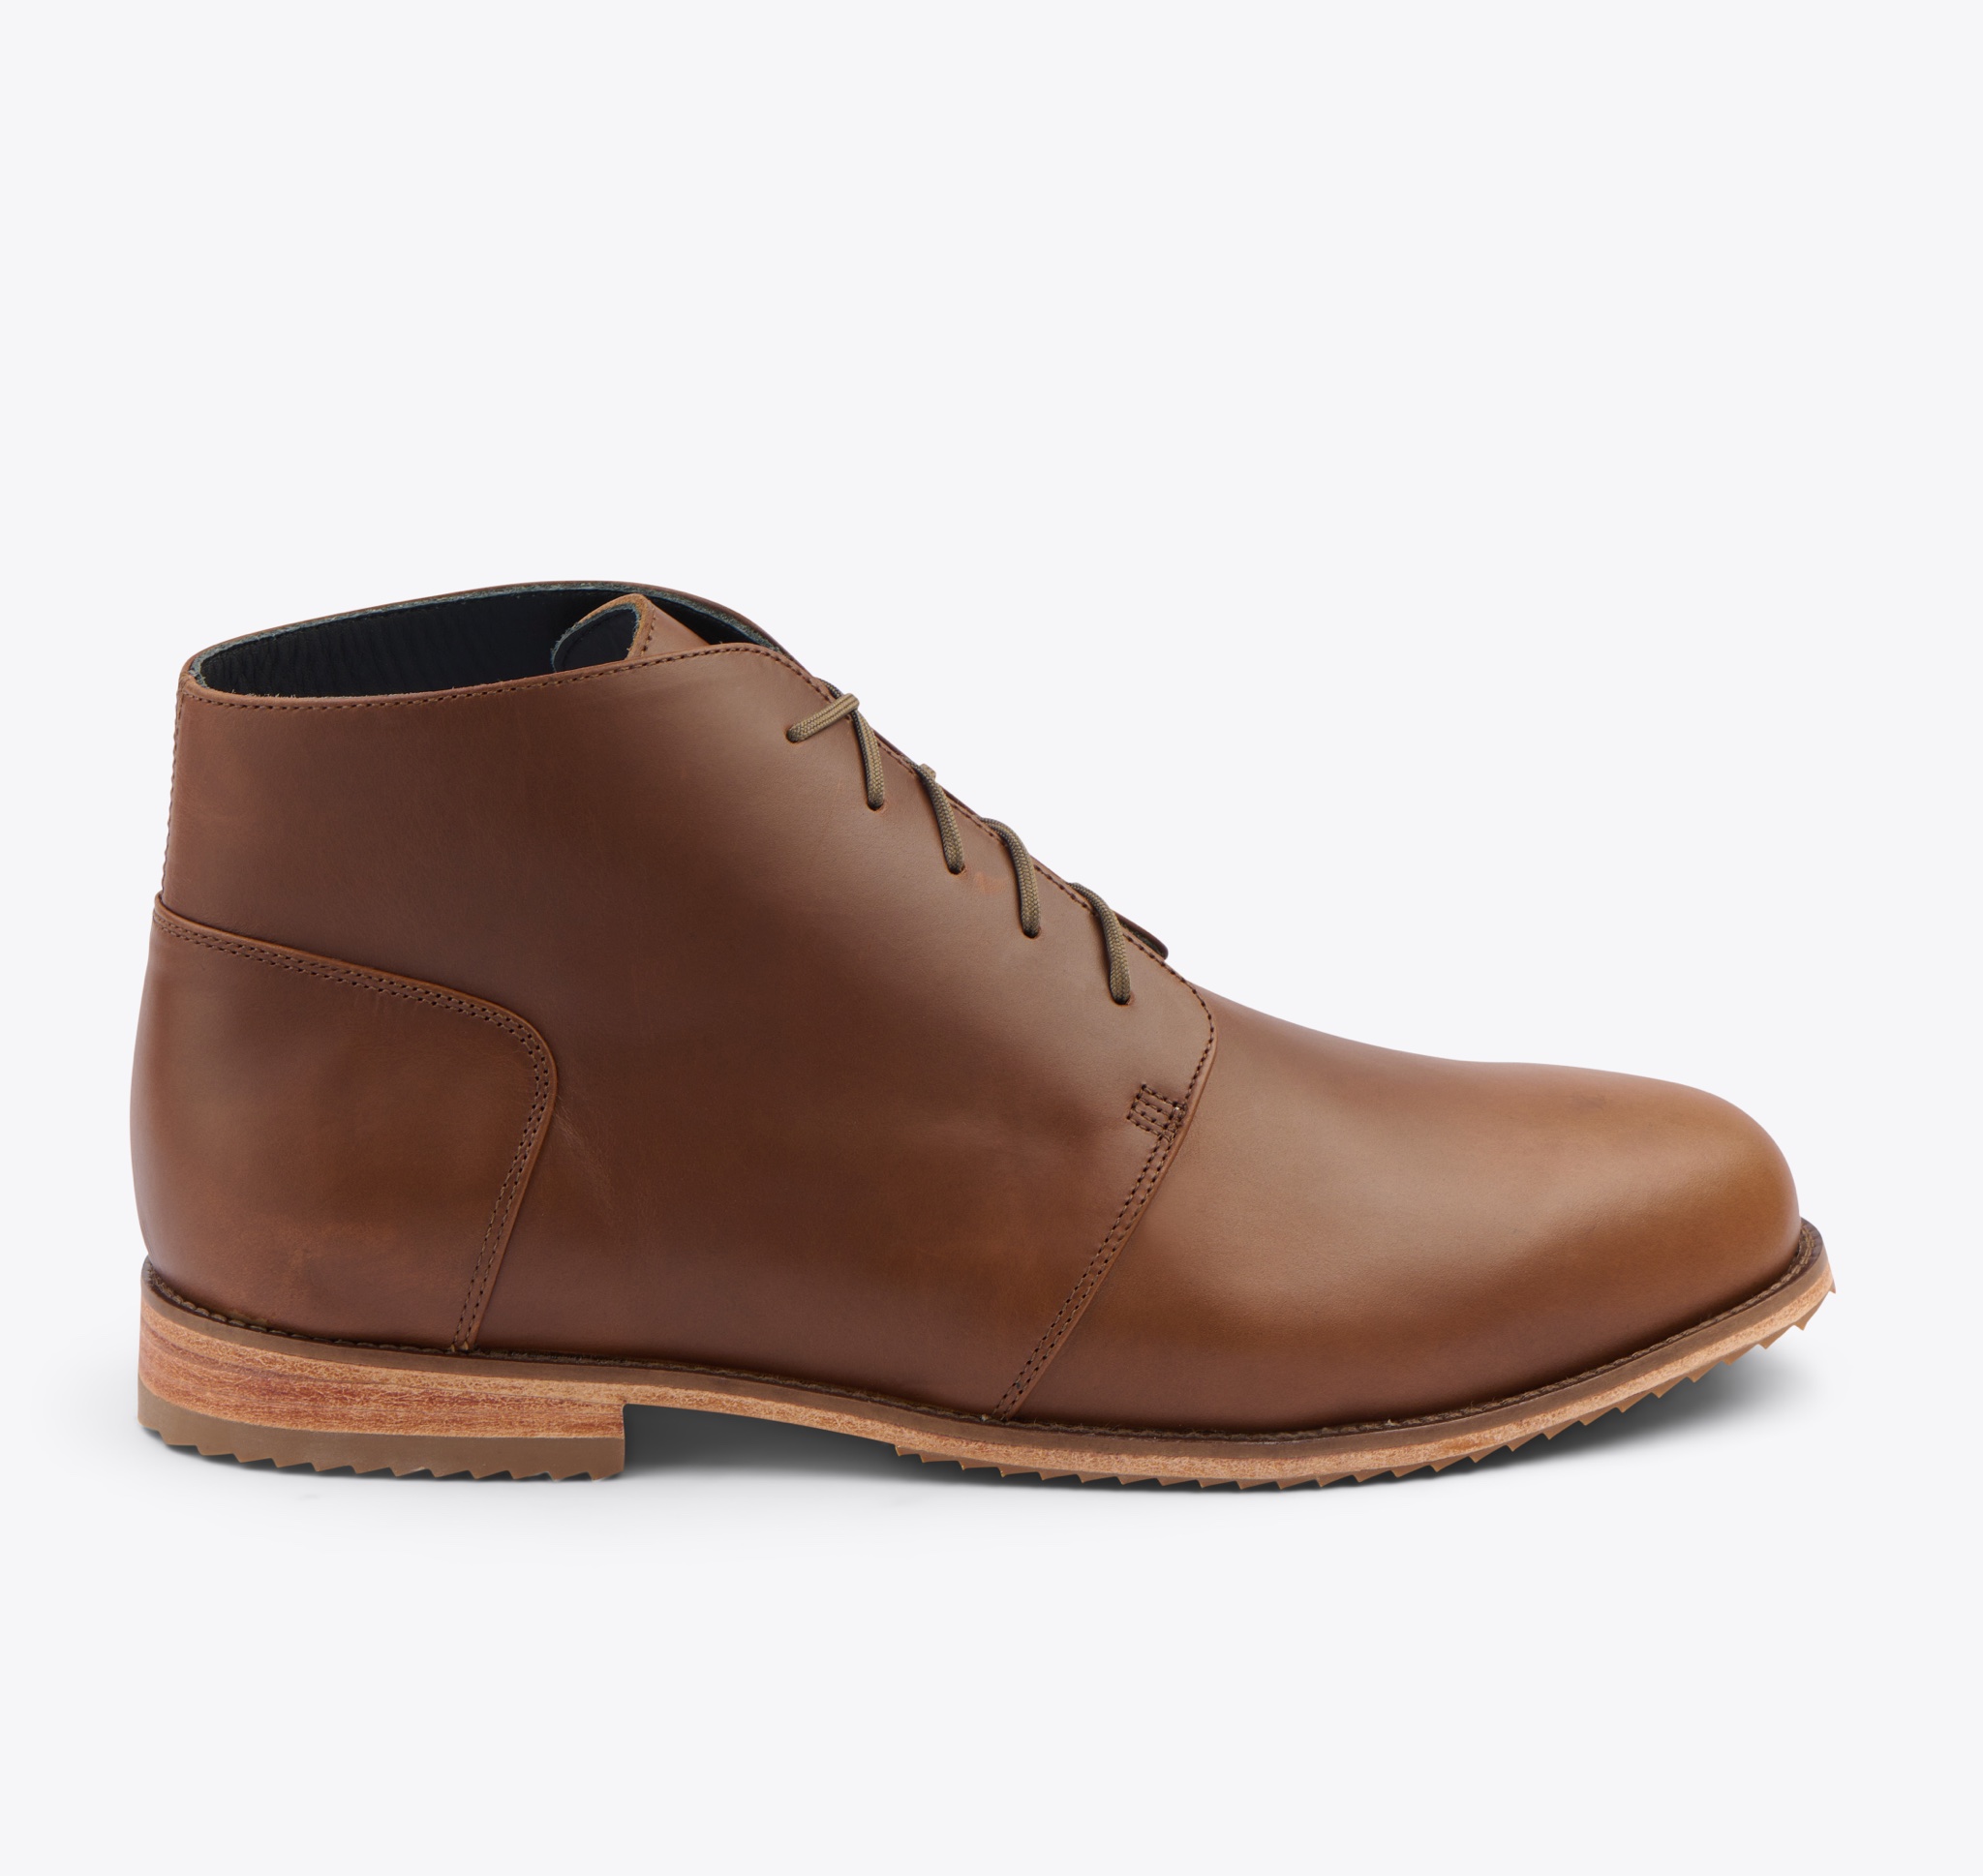 Nisolo Everyday Chukka Boot Brown - Every Nisolo product is built on the foundation of comfort, function, and design. 